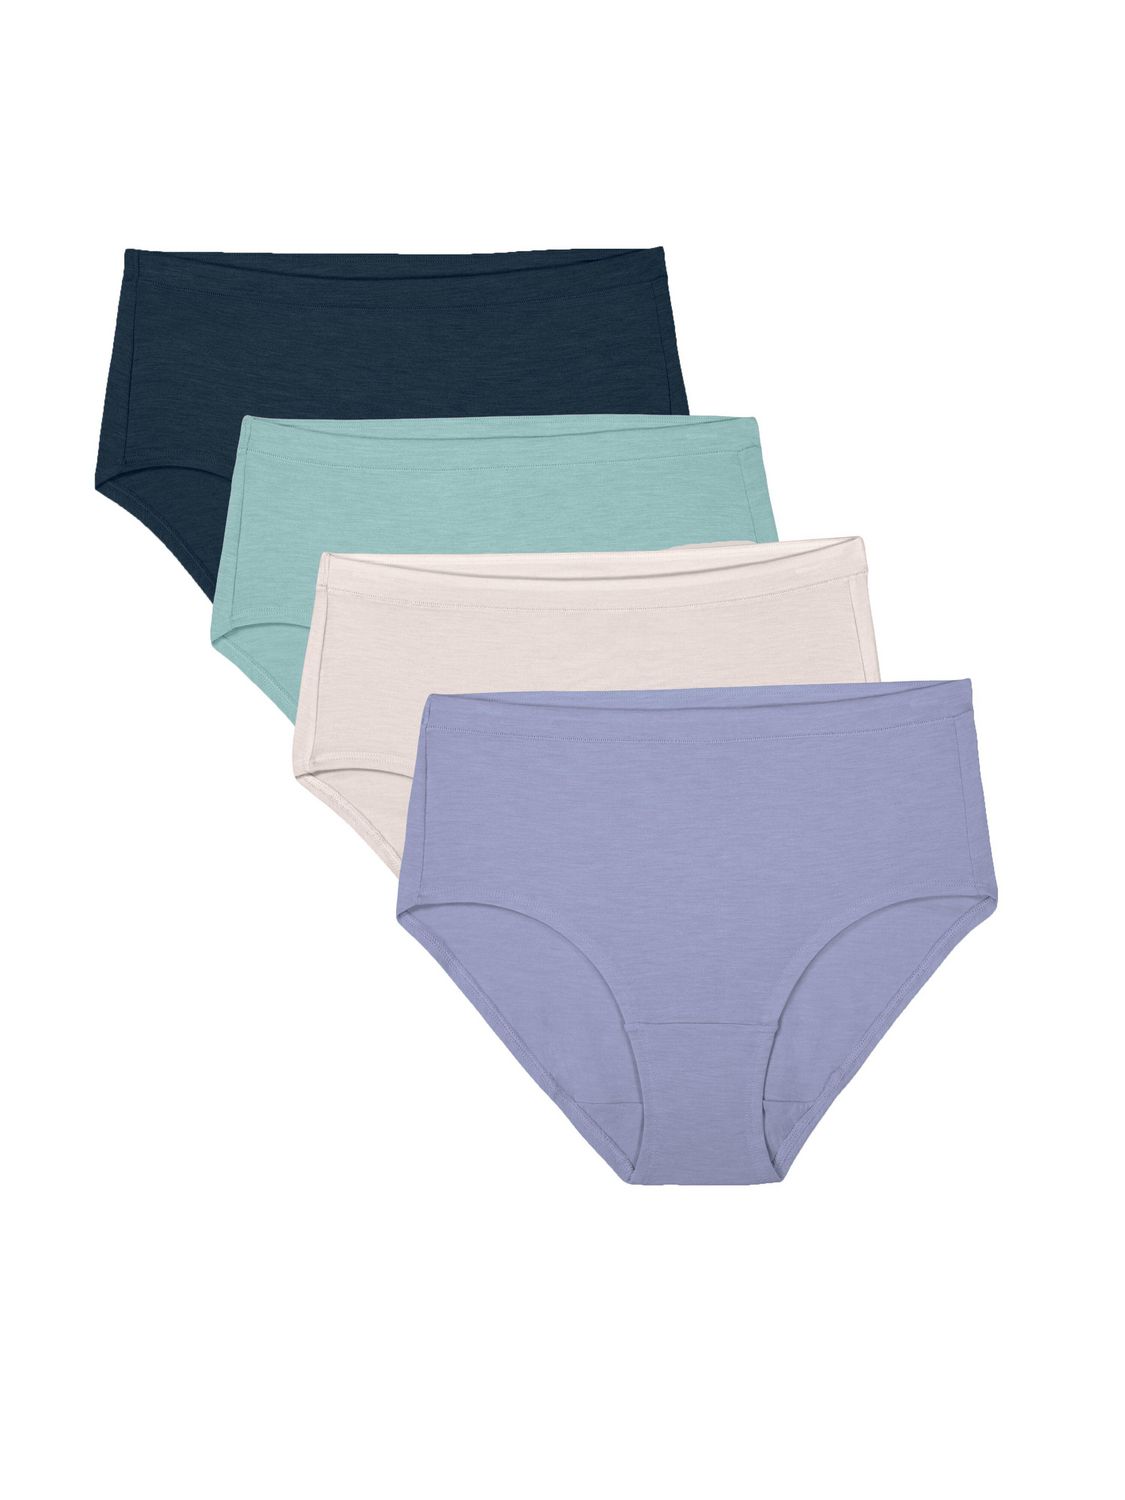 Fruit of the Loom Women's Ultra Soft Modal Low-rise Brief, 4-Pack, Sizes:  9-13